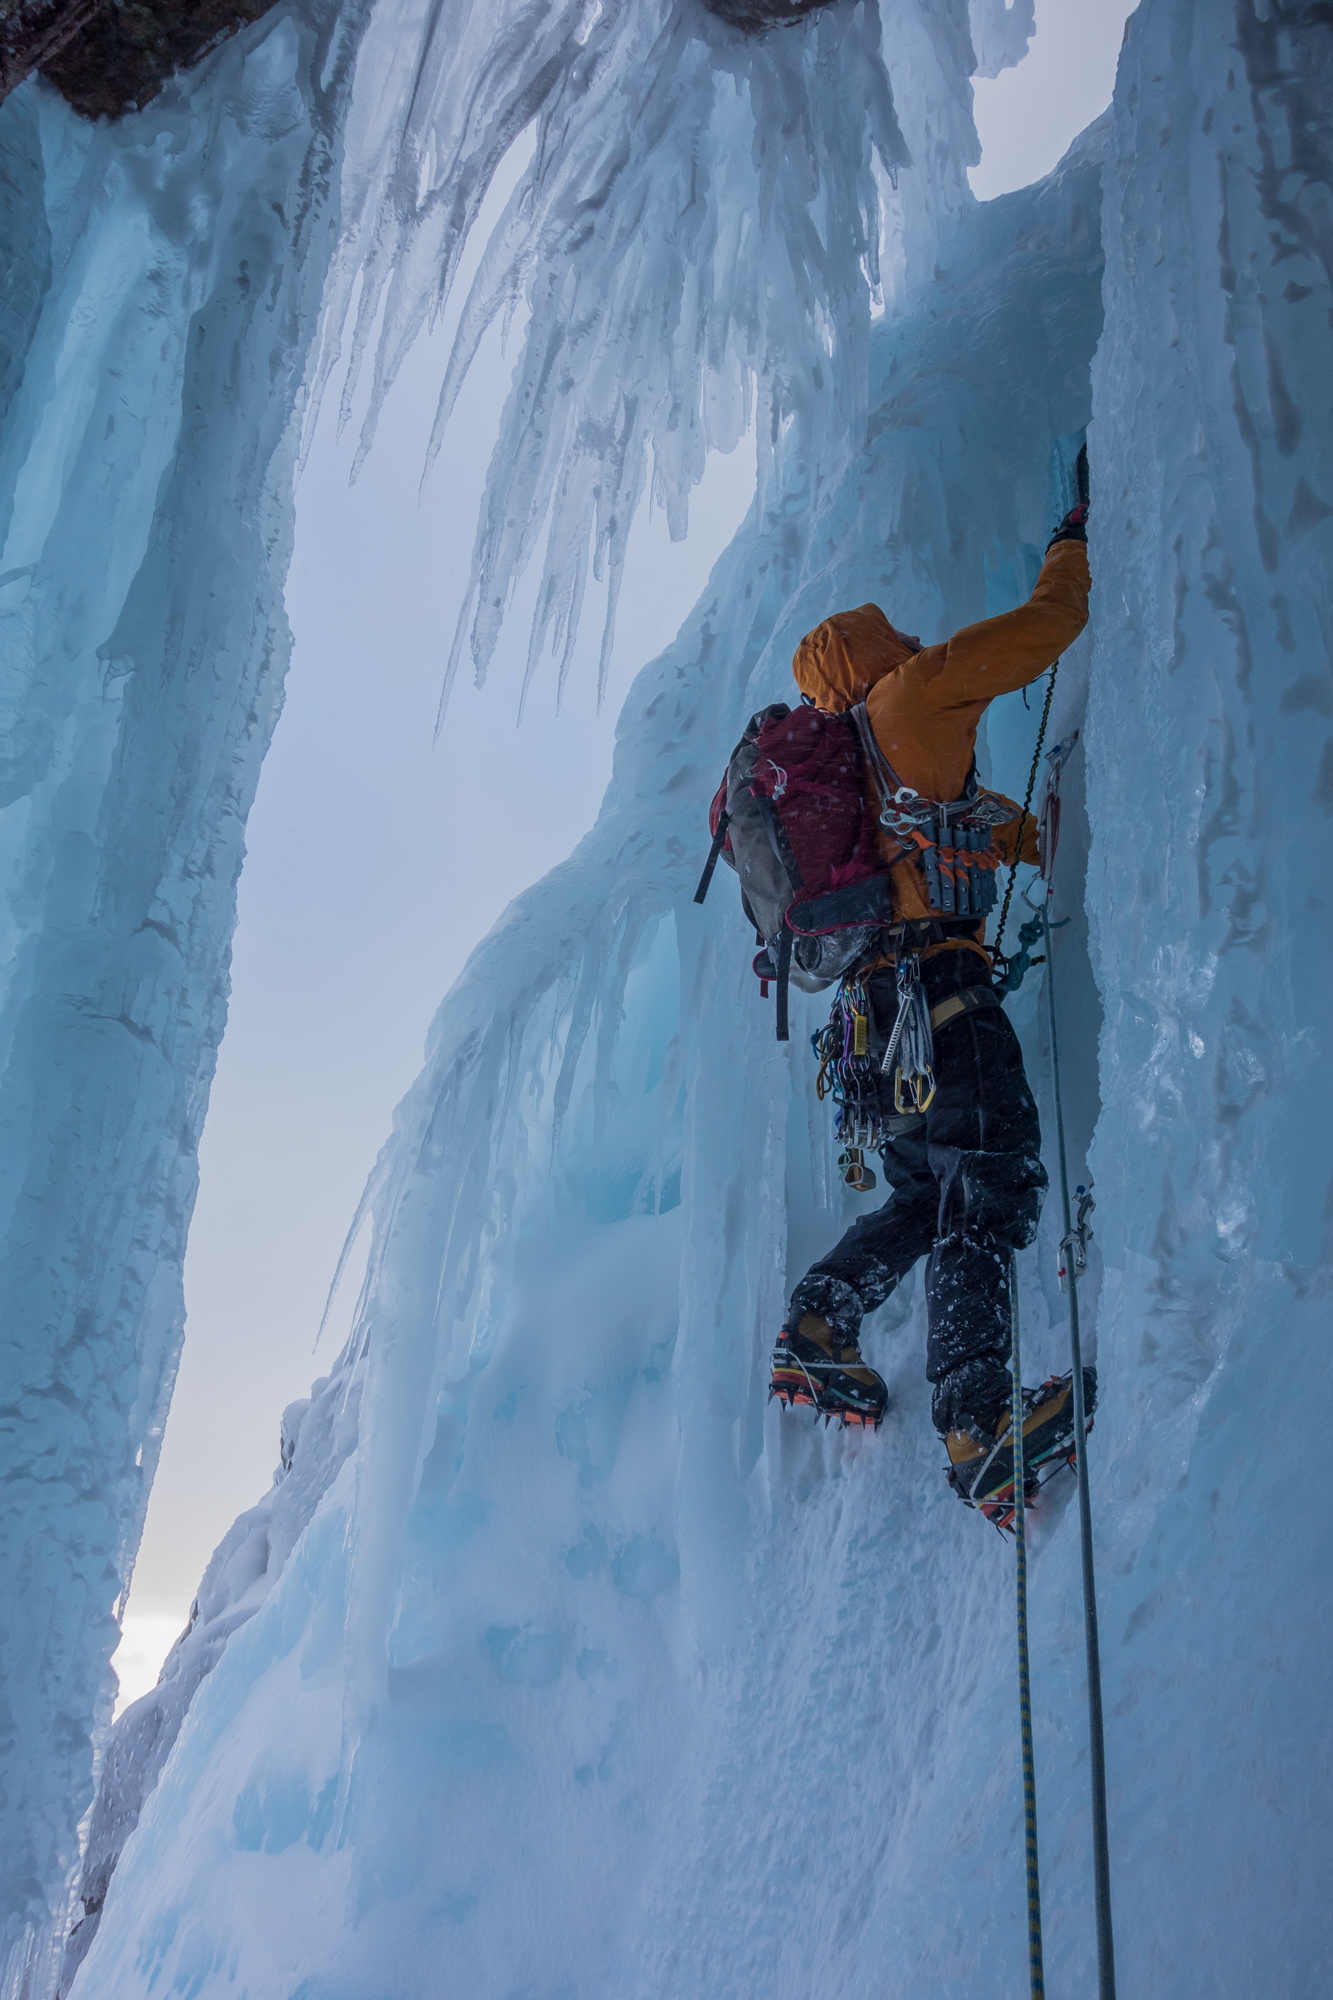 Scoping out the way ahead at the start of the crux pillar - the cavity under the ice to my left was amazing!